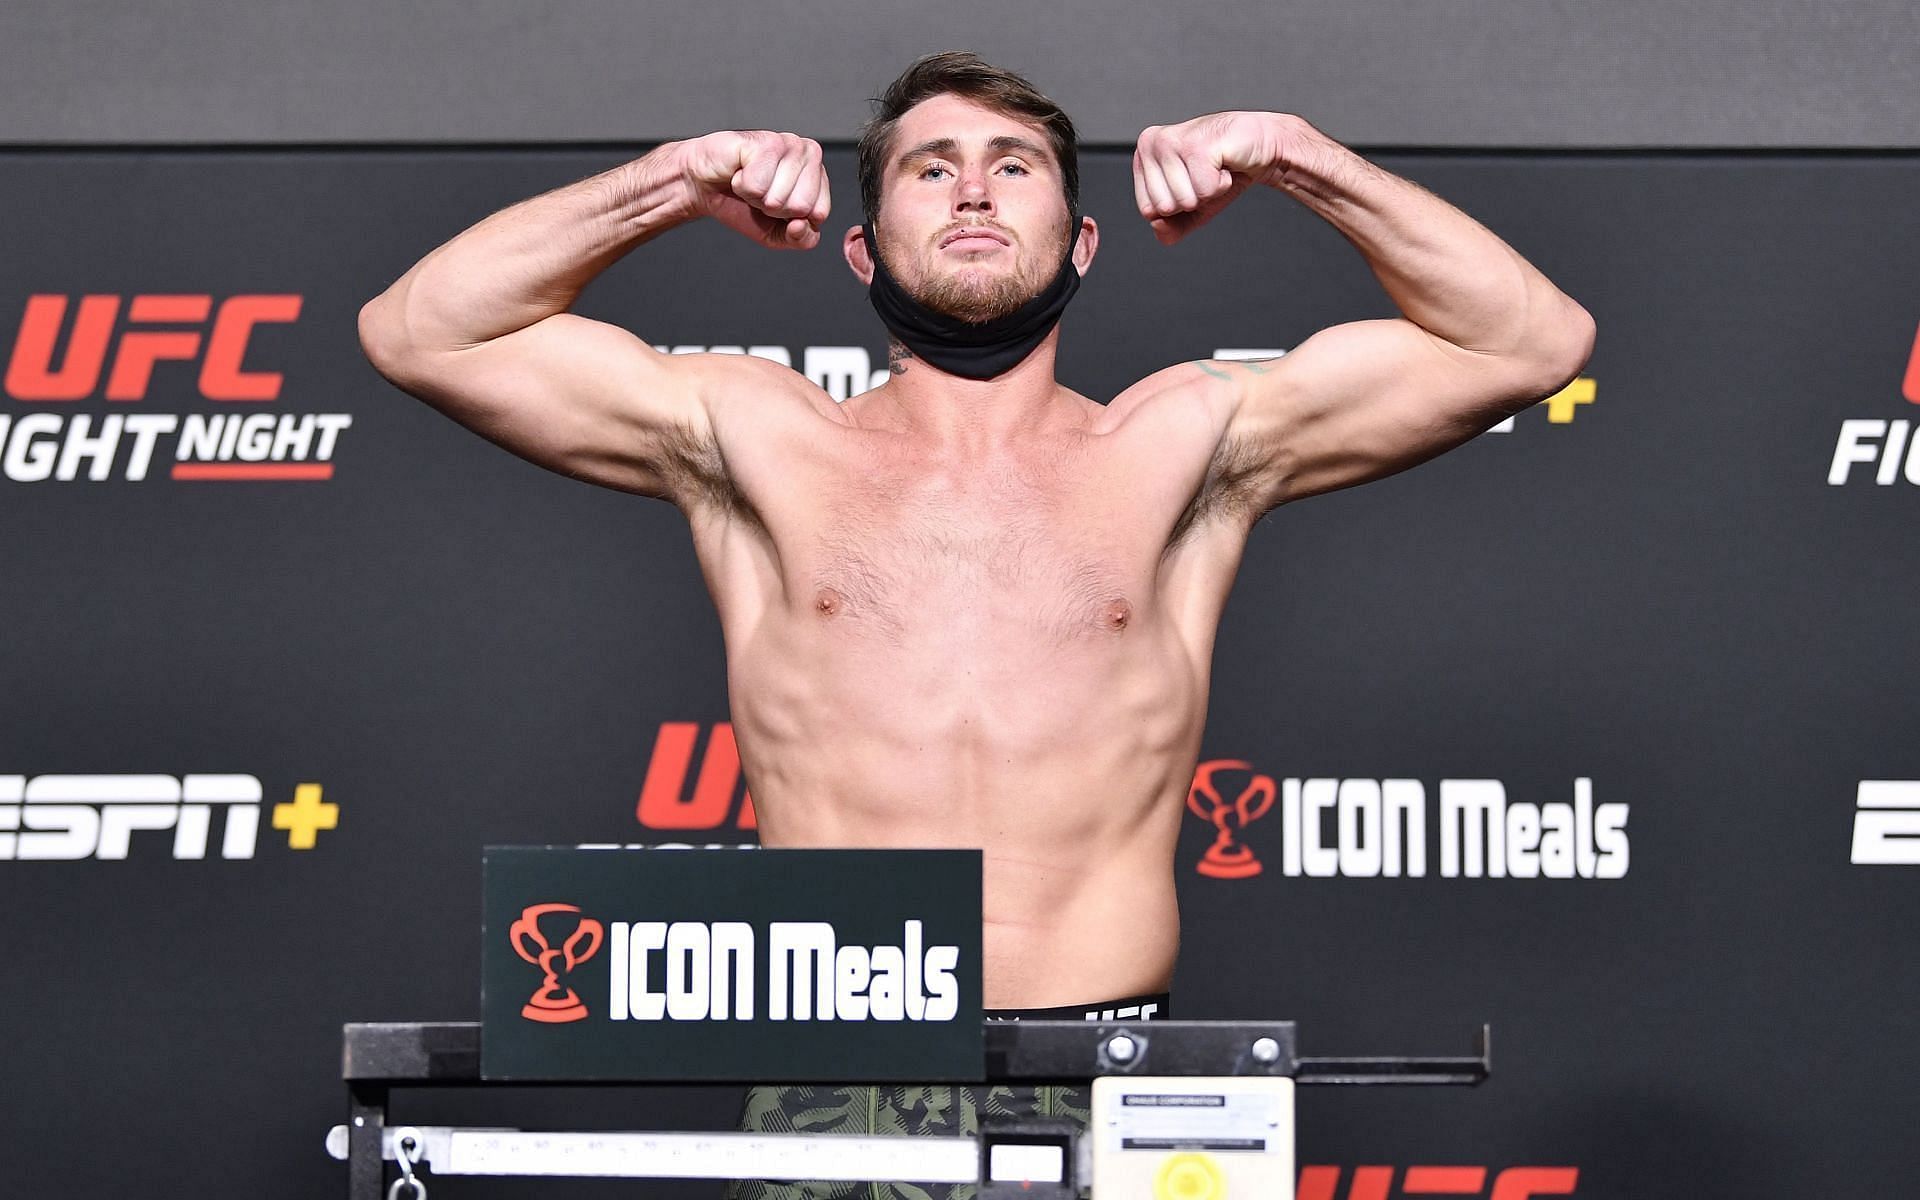 tongue Naughty Chronicle UFC News: Darren Till shares depleted picture of himself